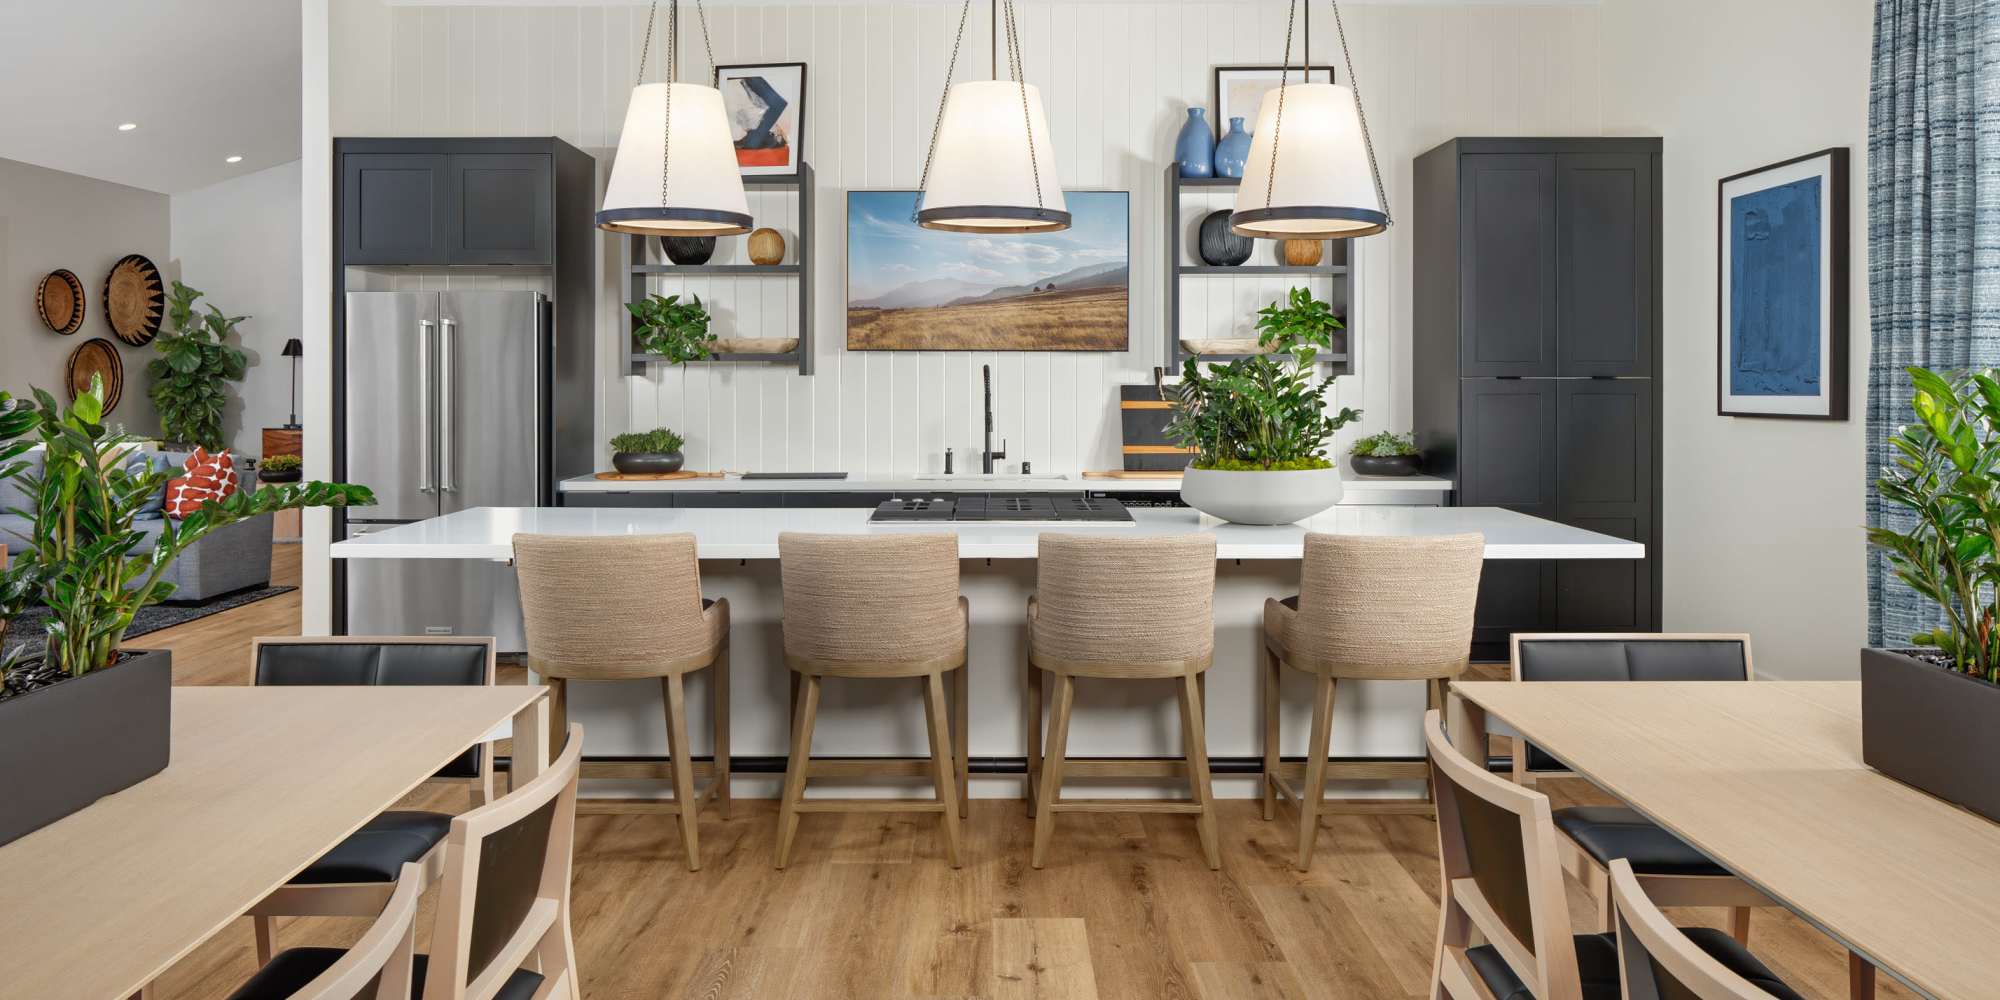 Image of Kitchen at Atwell at Folsom Ranch in Folsom, California